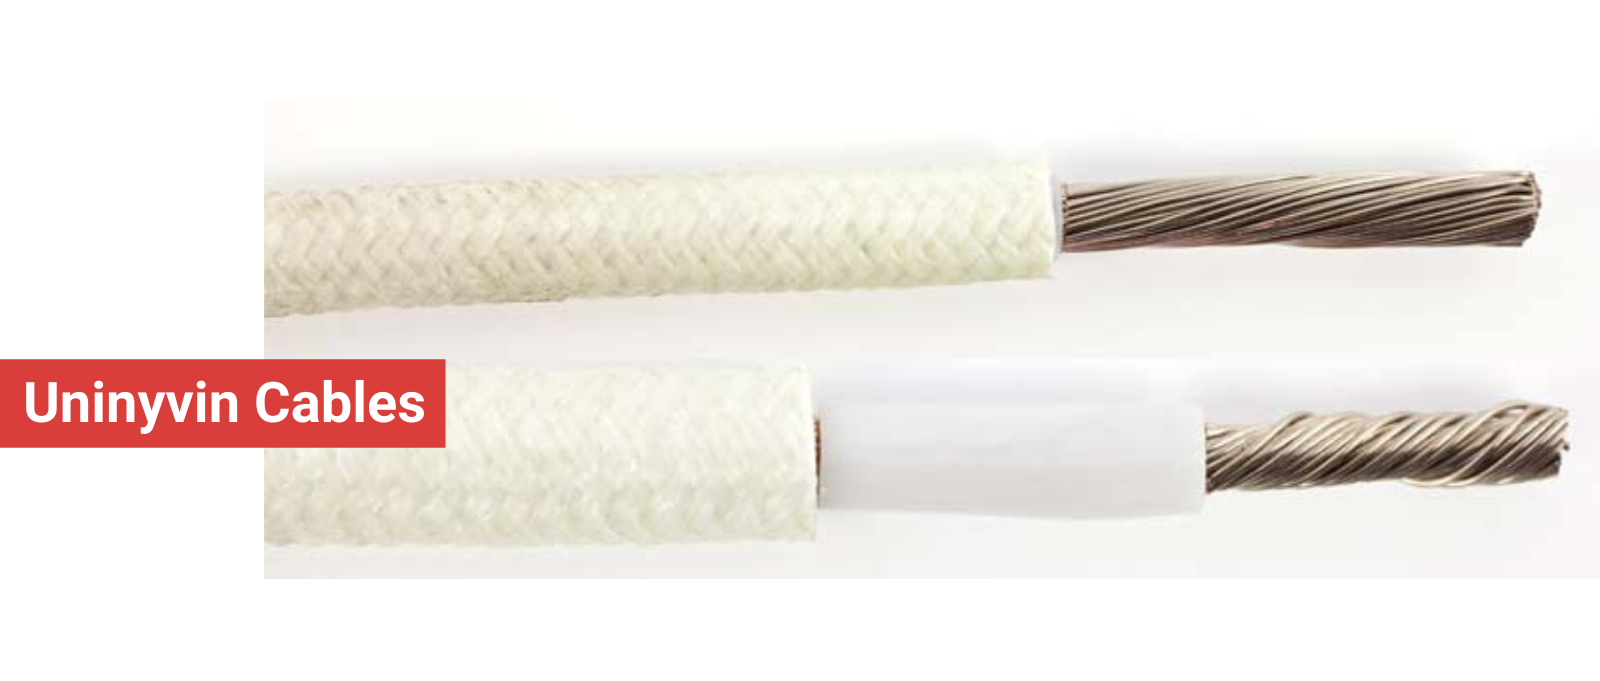 Manufacturers of Uninyvin Cables in Mumbai